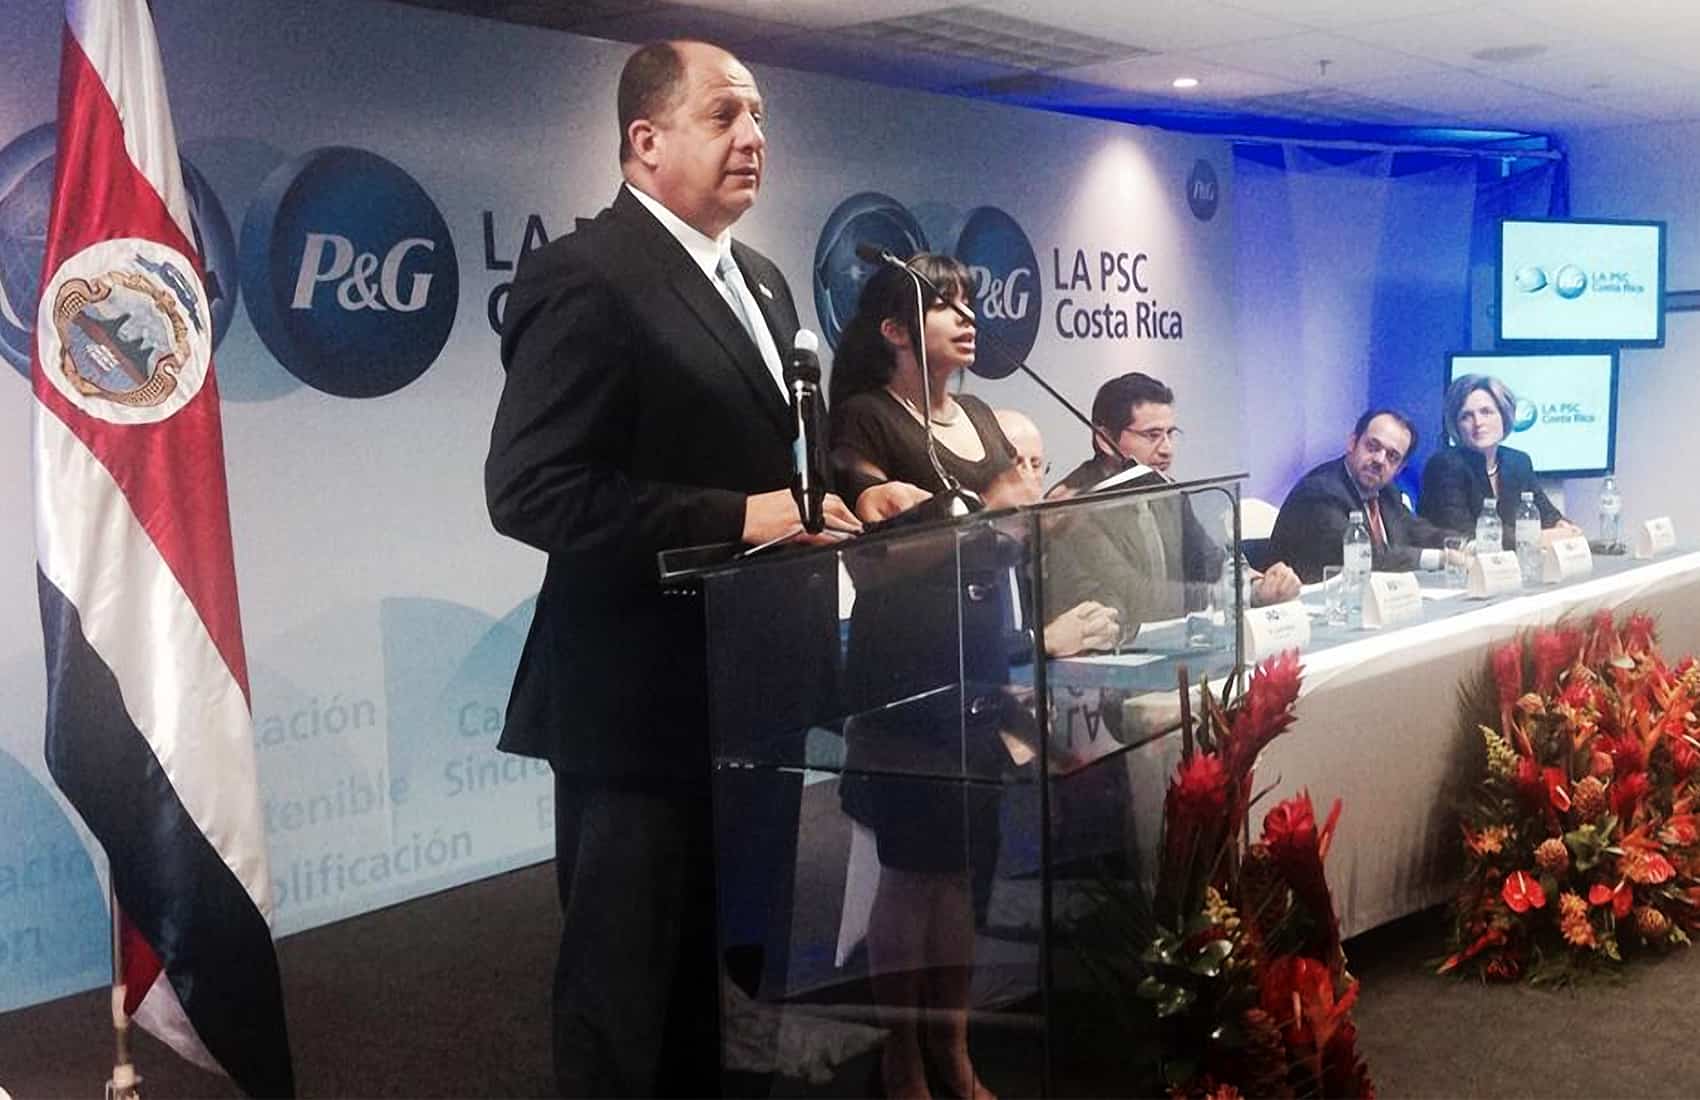 President Luis Guillermo Solís at P&G